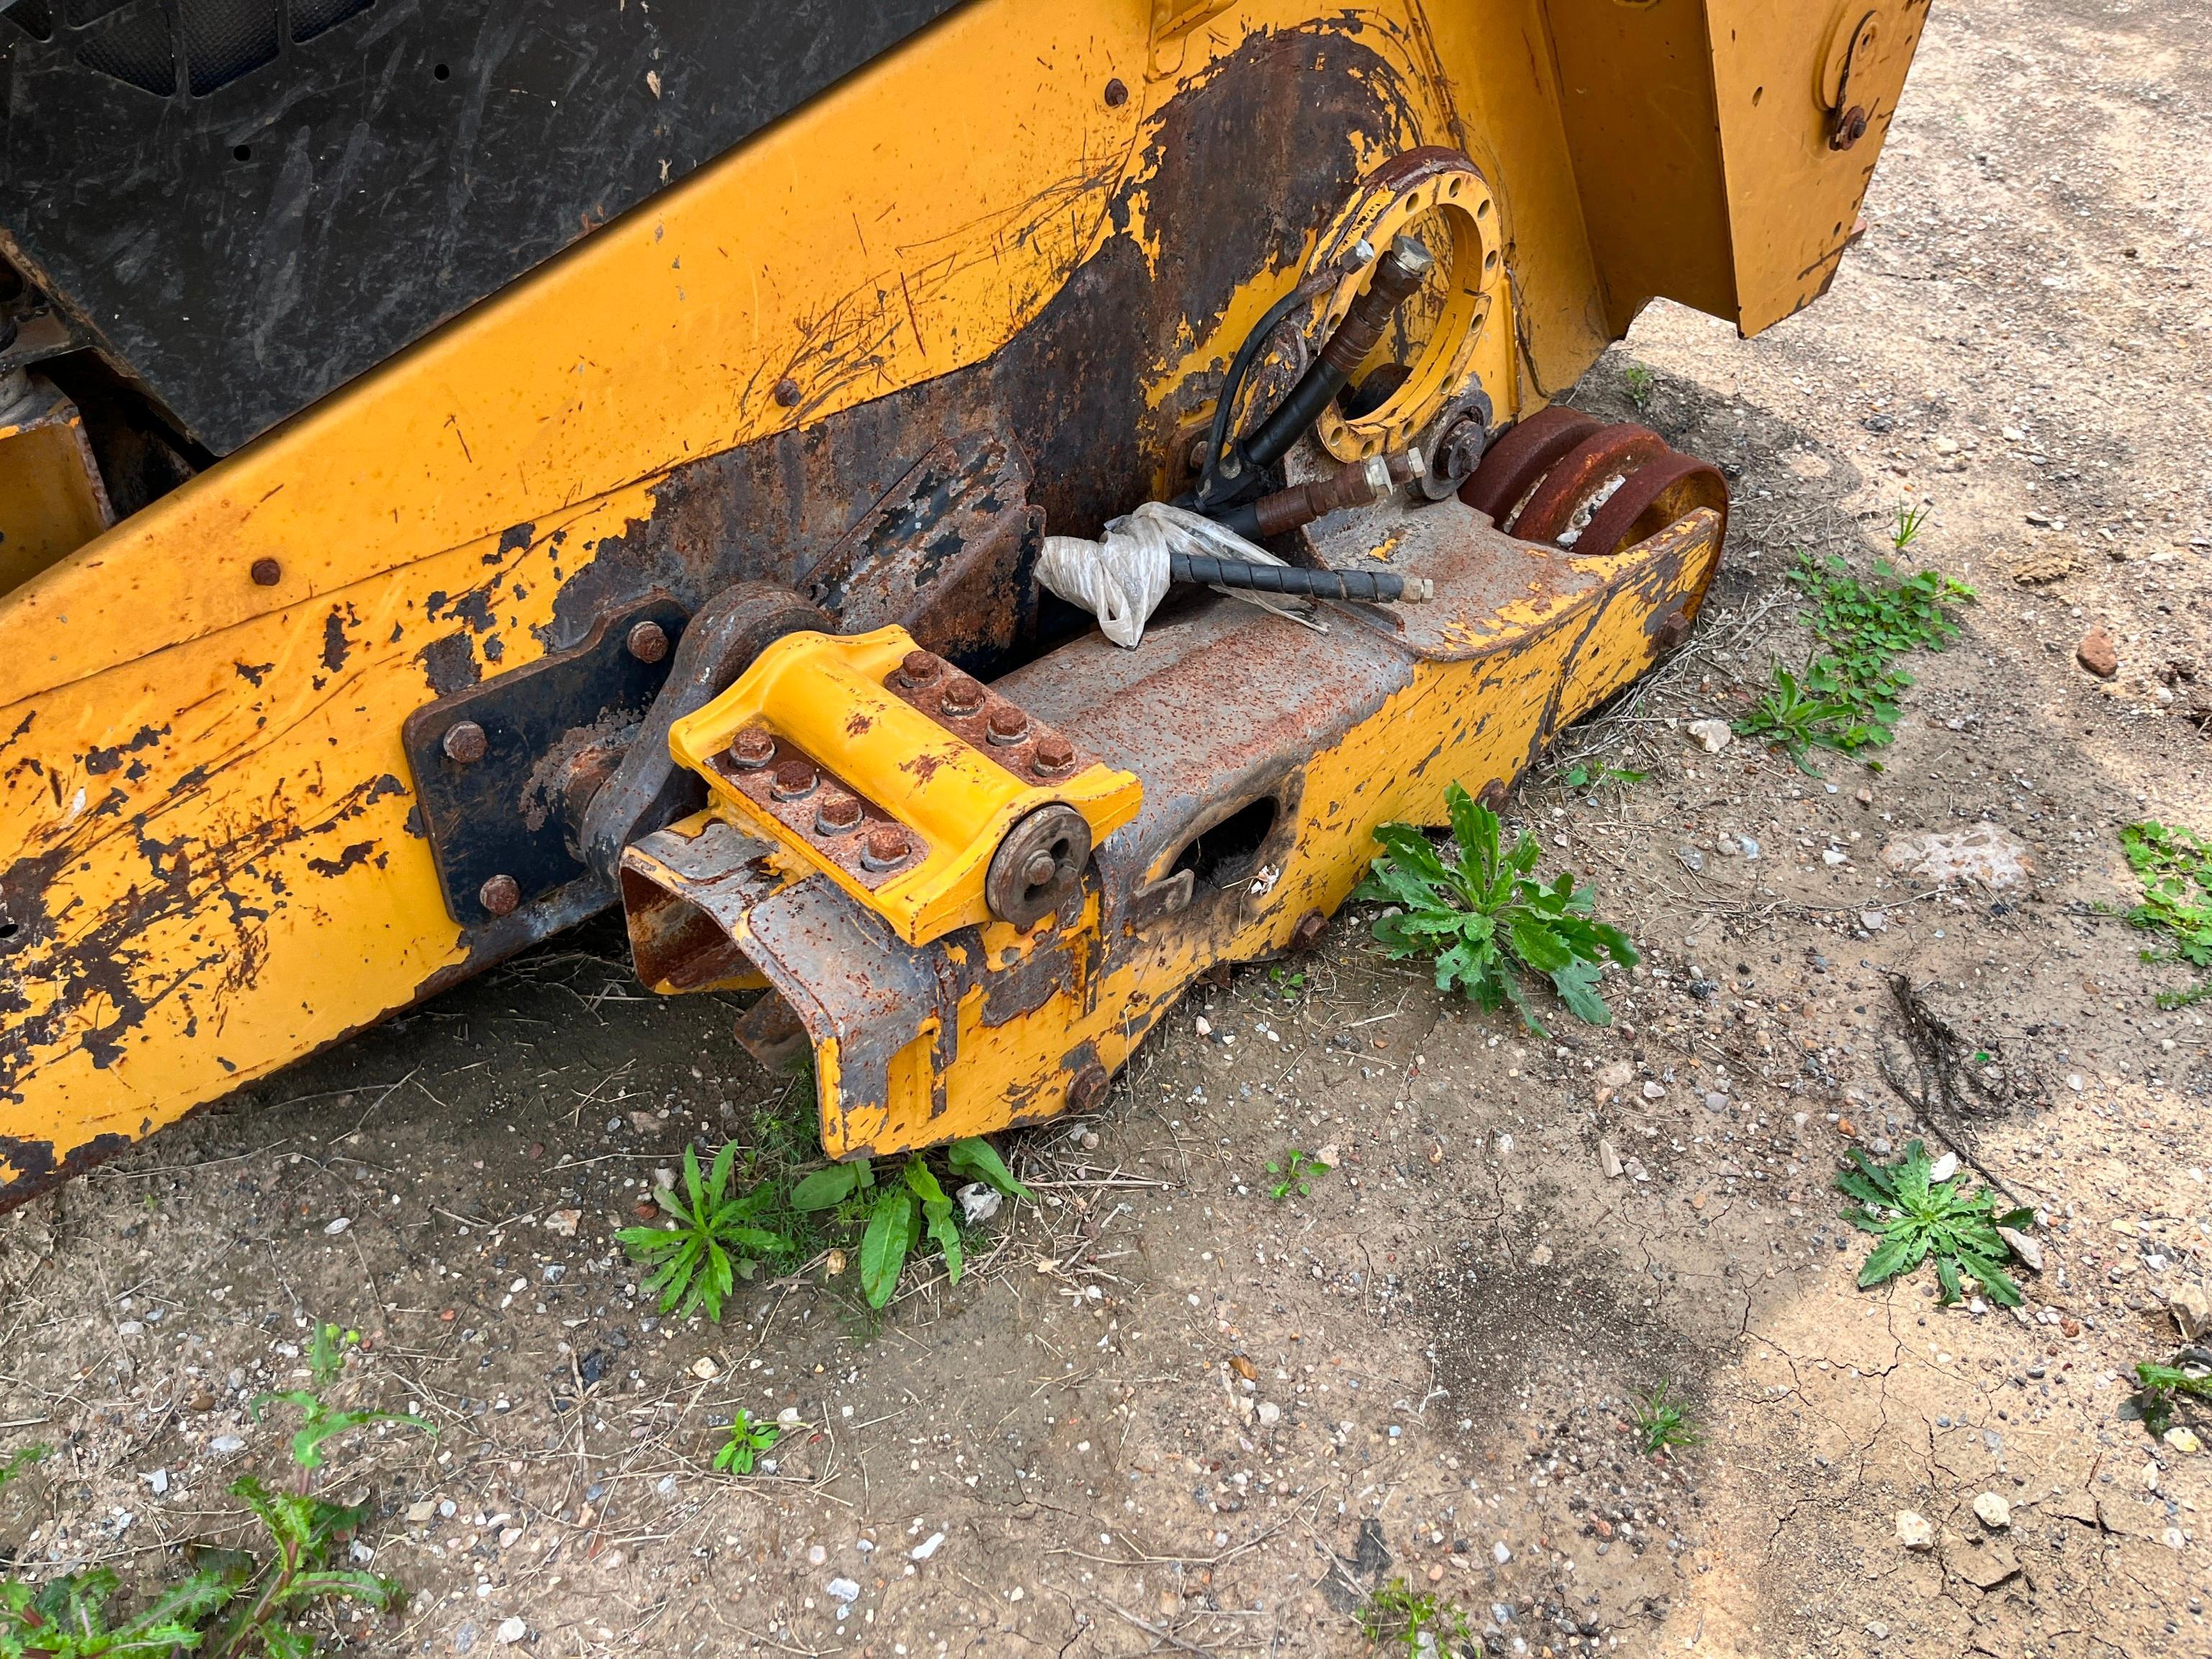 CAT 259D RUBBER TRACKED SKID STEER SN:CAT0259DAFTL05928 Parts.